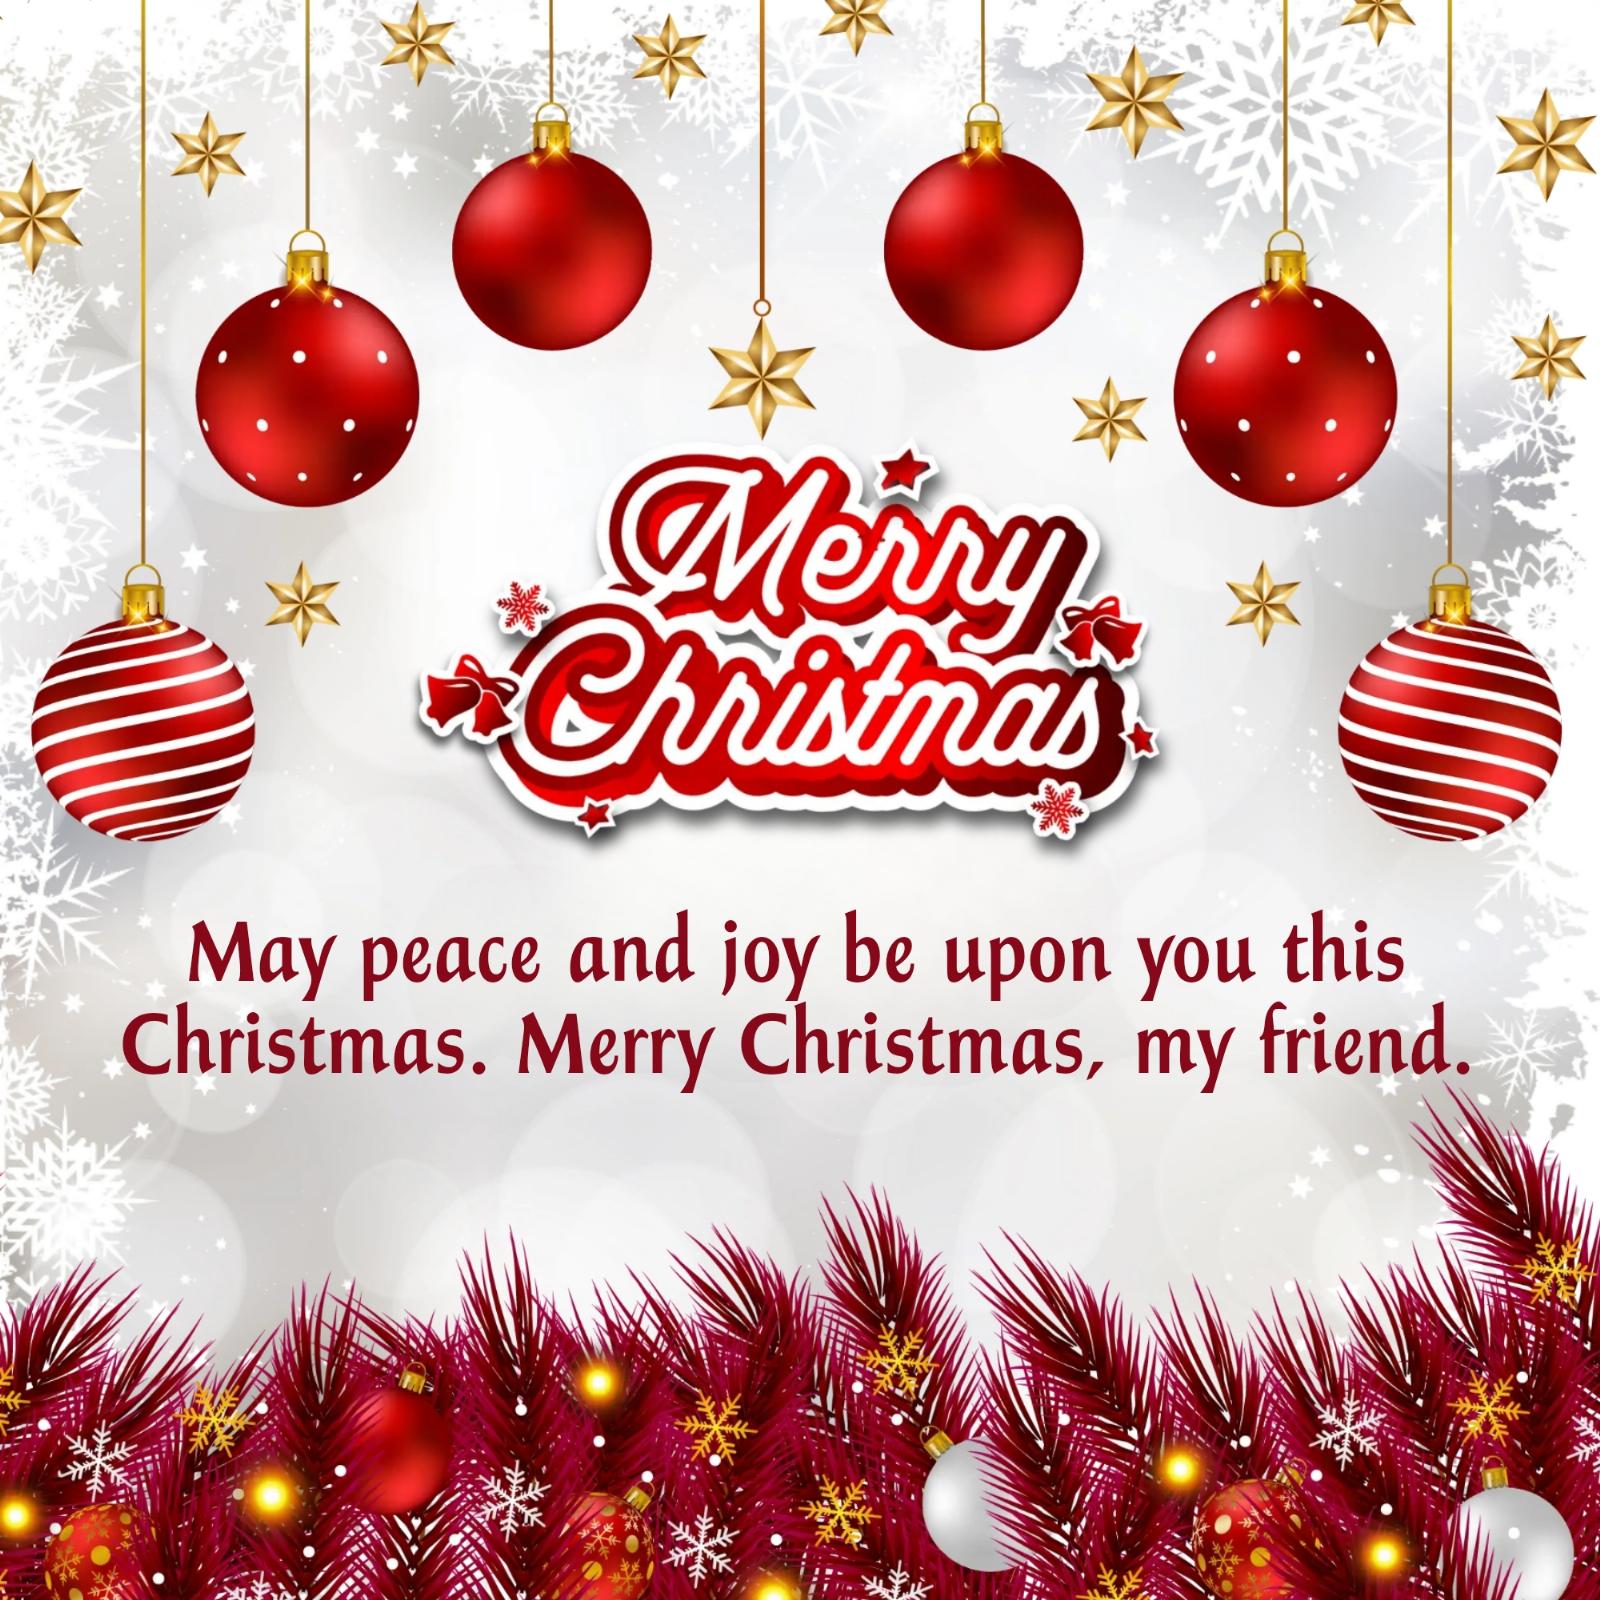 May peace and joy be upon you this Christmas